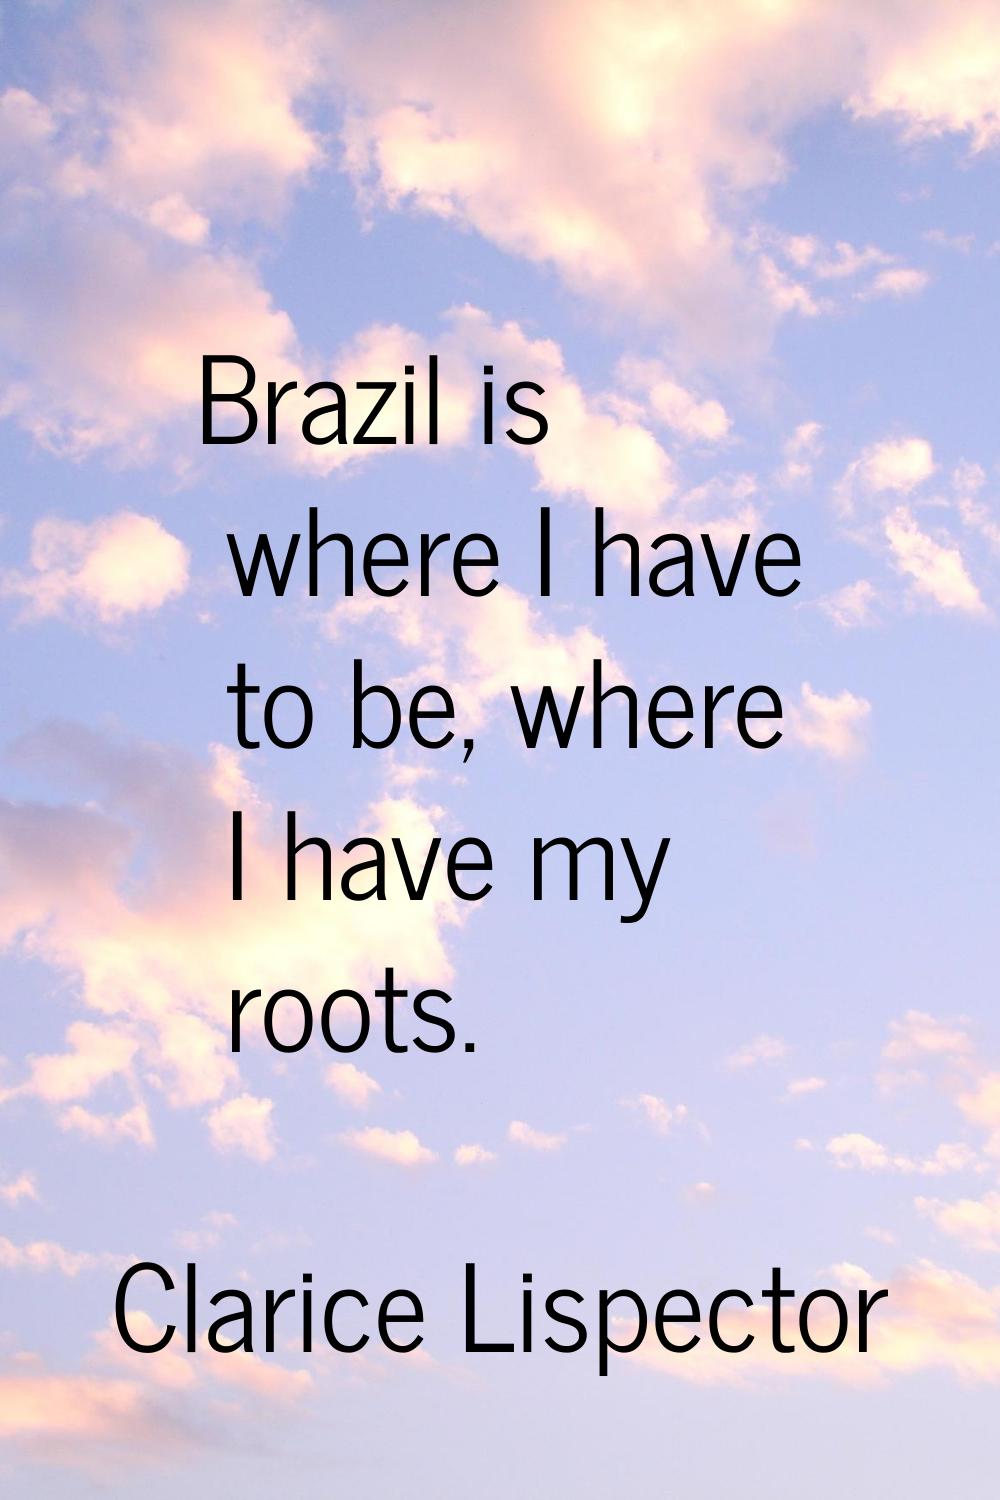 Brazil is where I have to be, where I have my roots.